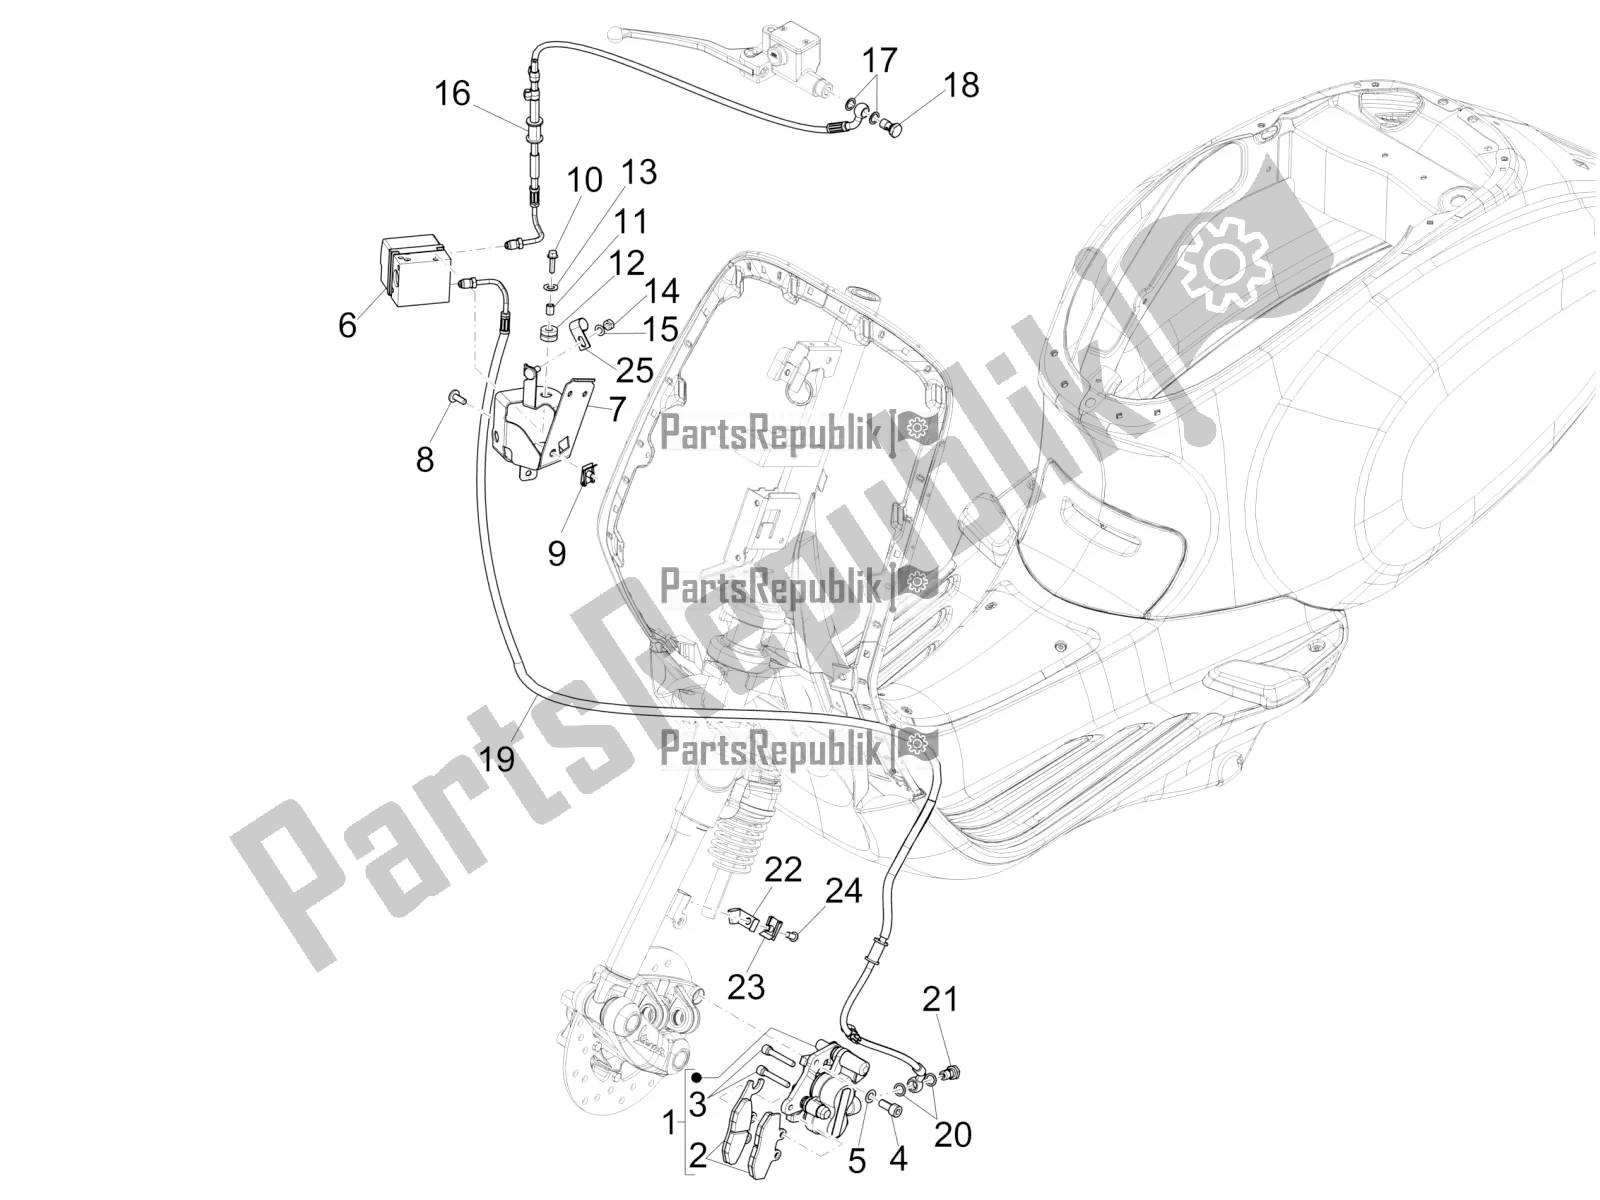 All parts for the Brakes Pipes - Calipers (abs) of the Vespa Sprint Sport 150 Iget 2019